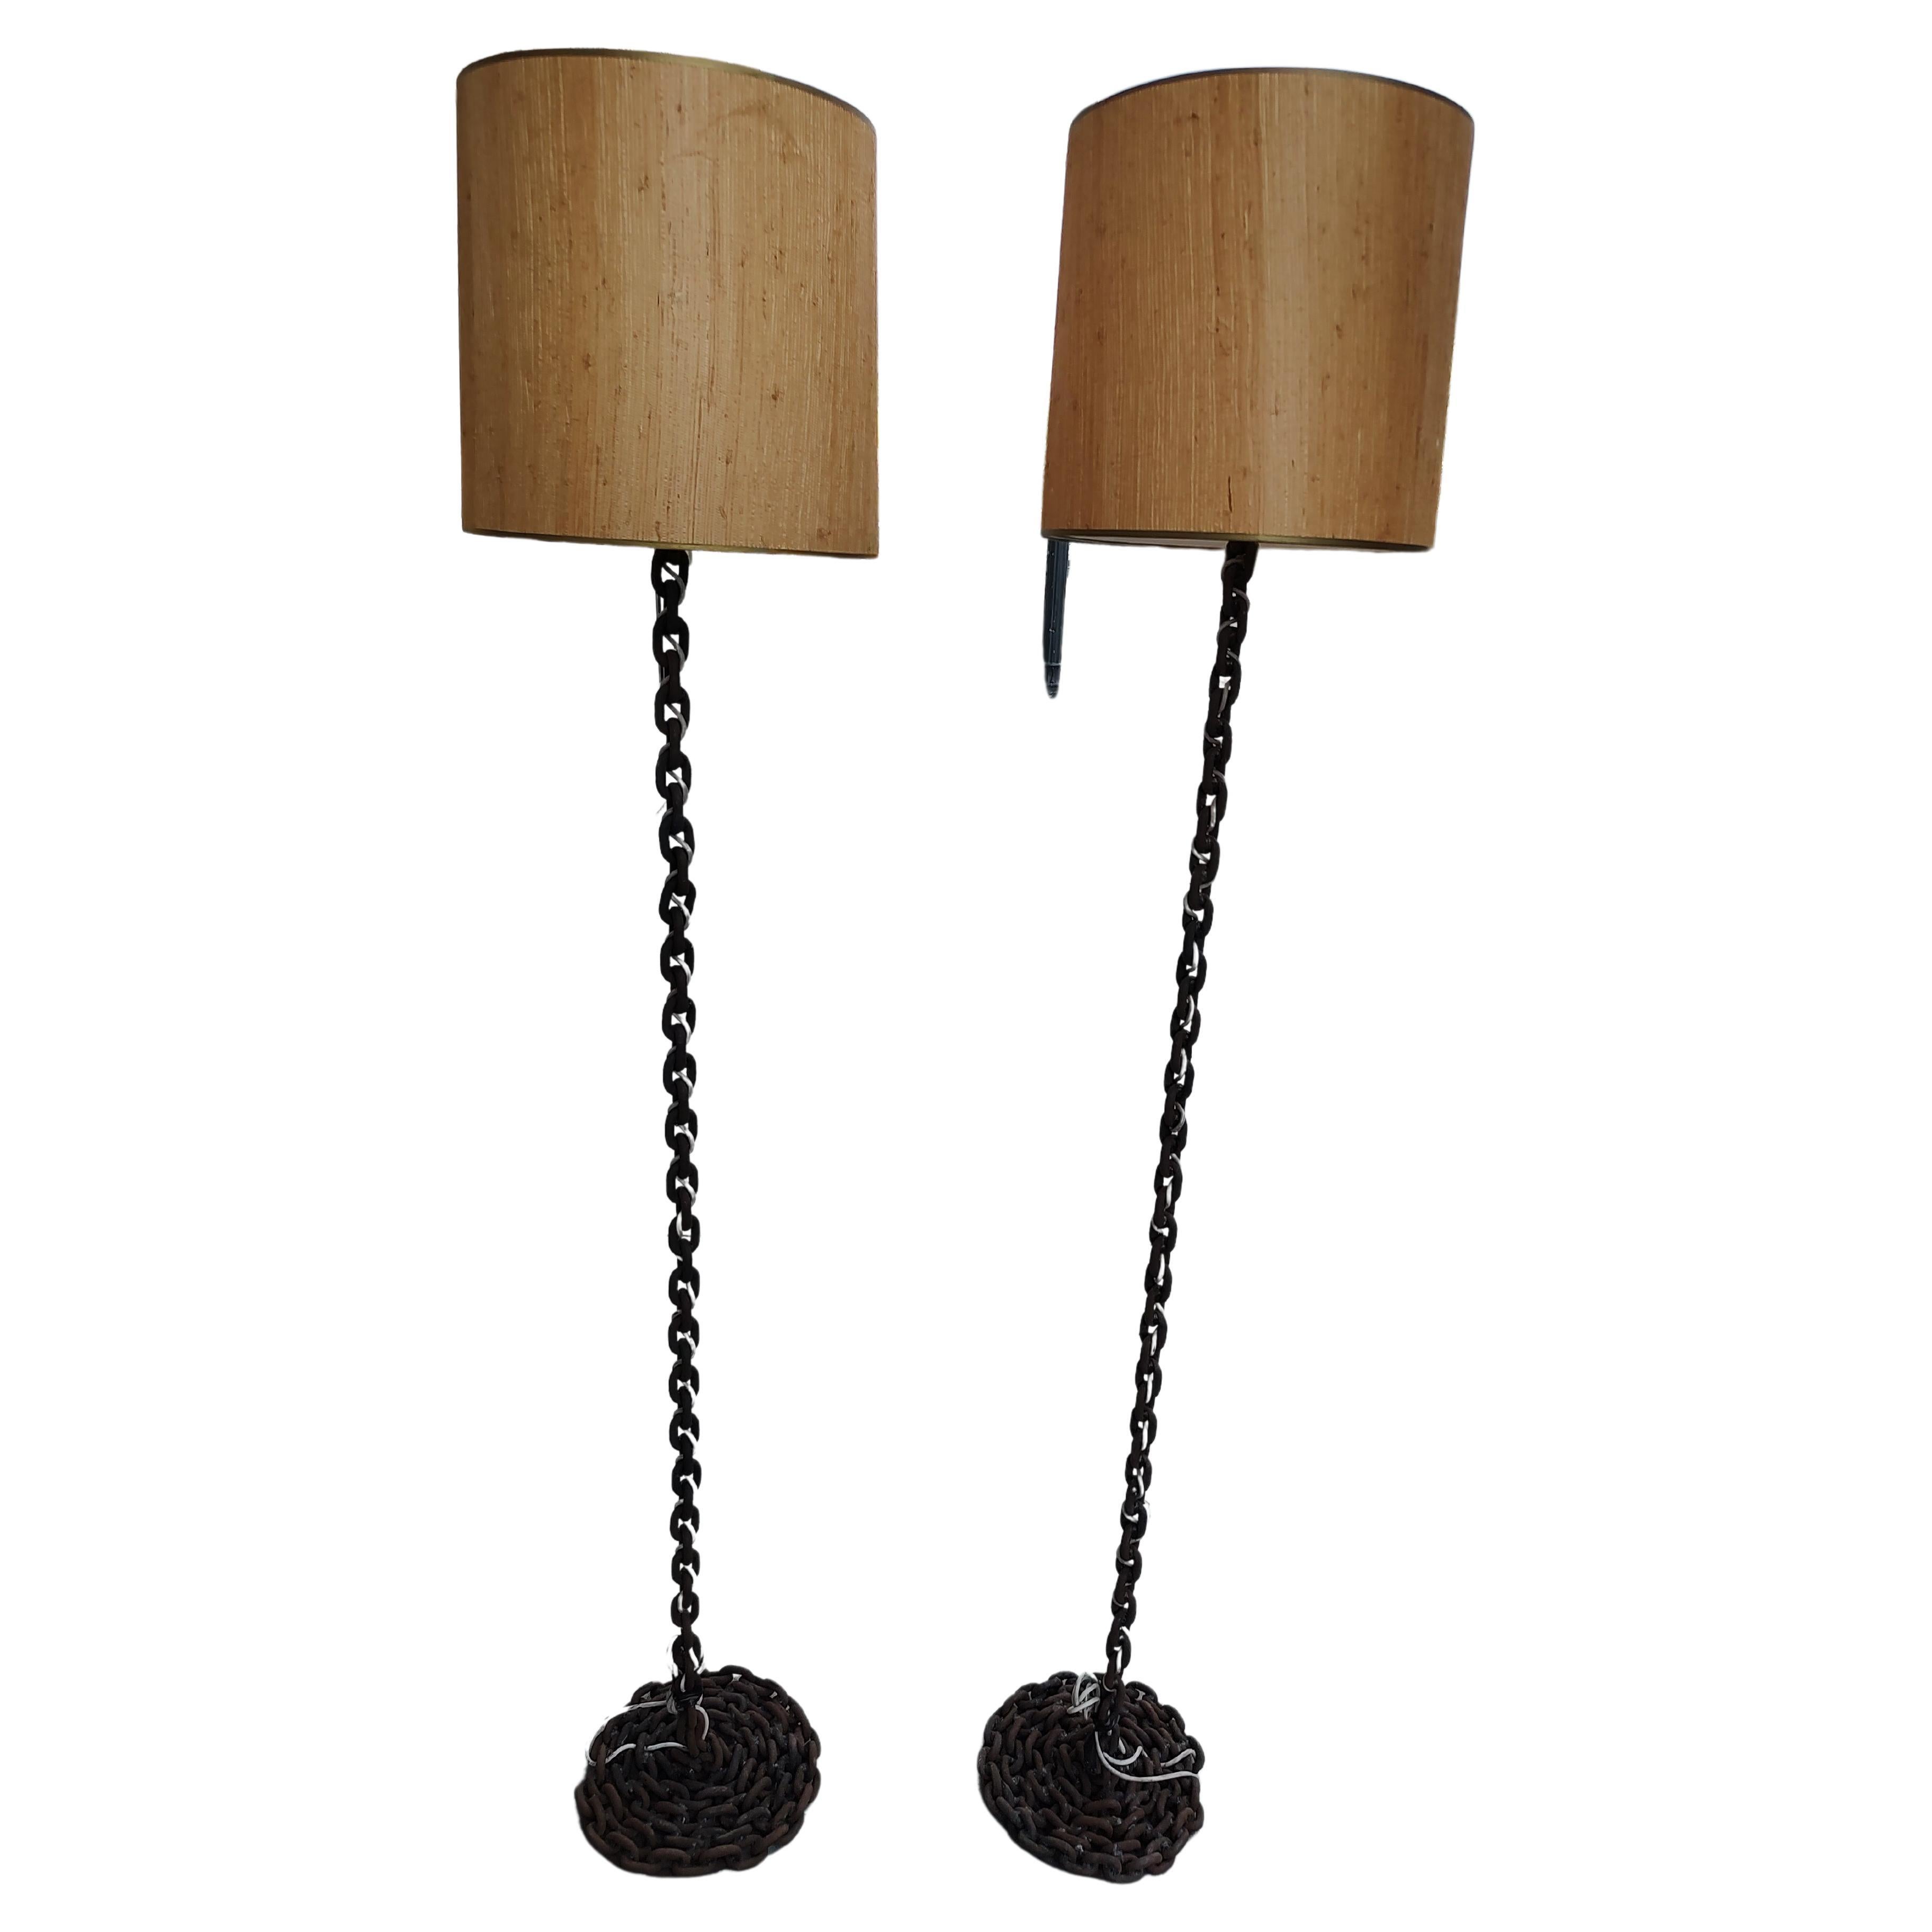 Fabulous pair of Mid-Century Modern Sculptural Brutalist iron chain rope floor lamps. Rust patina deluxe. Single Edison type bulb. Heavy & stable. In excellent vintage condition with minimal wear. Shades not included.